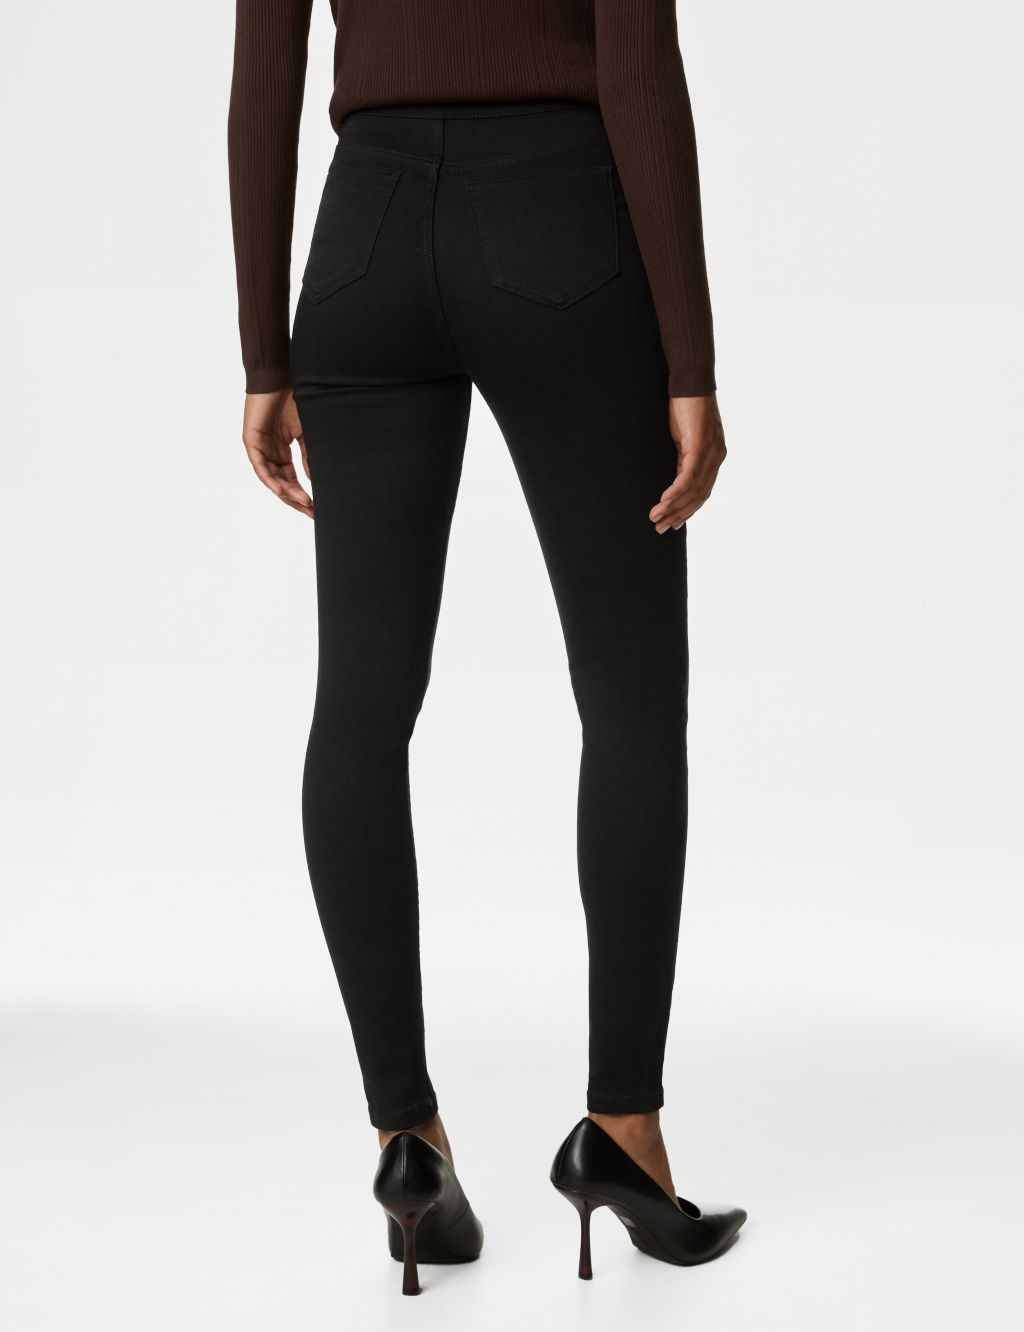 High Waisted Super Skinny Jeans image 4